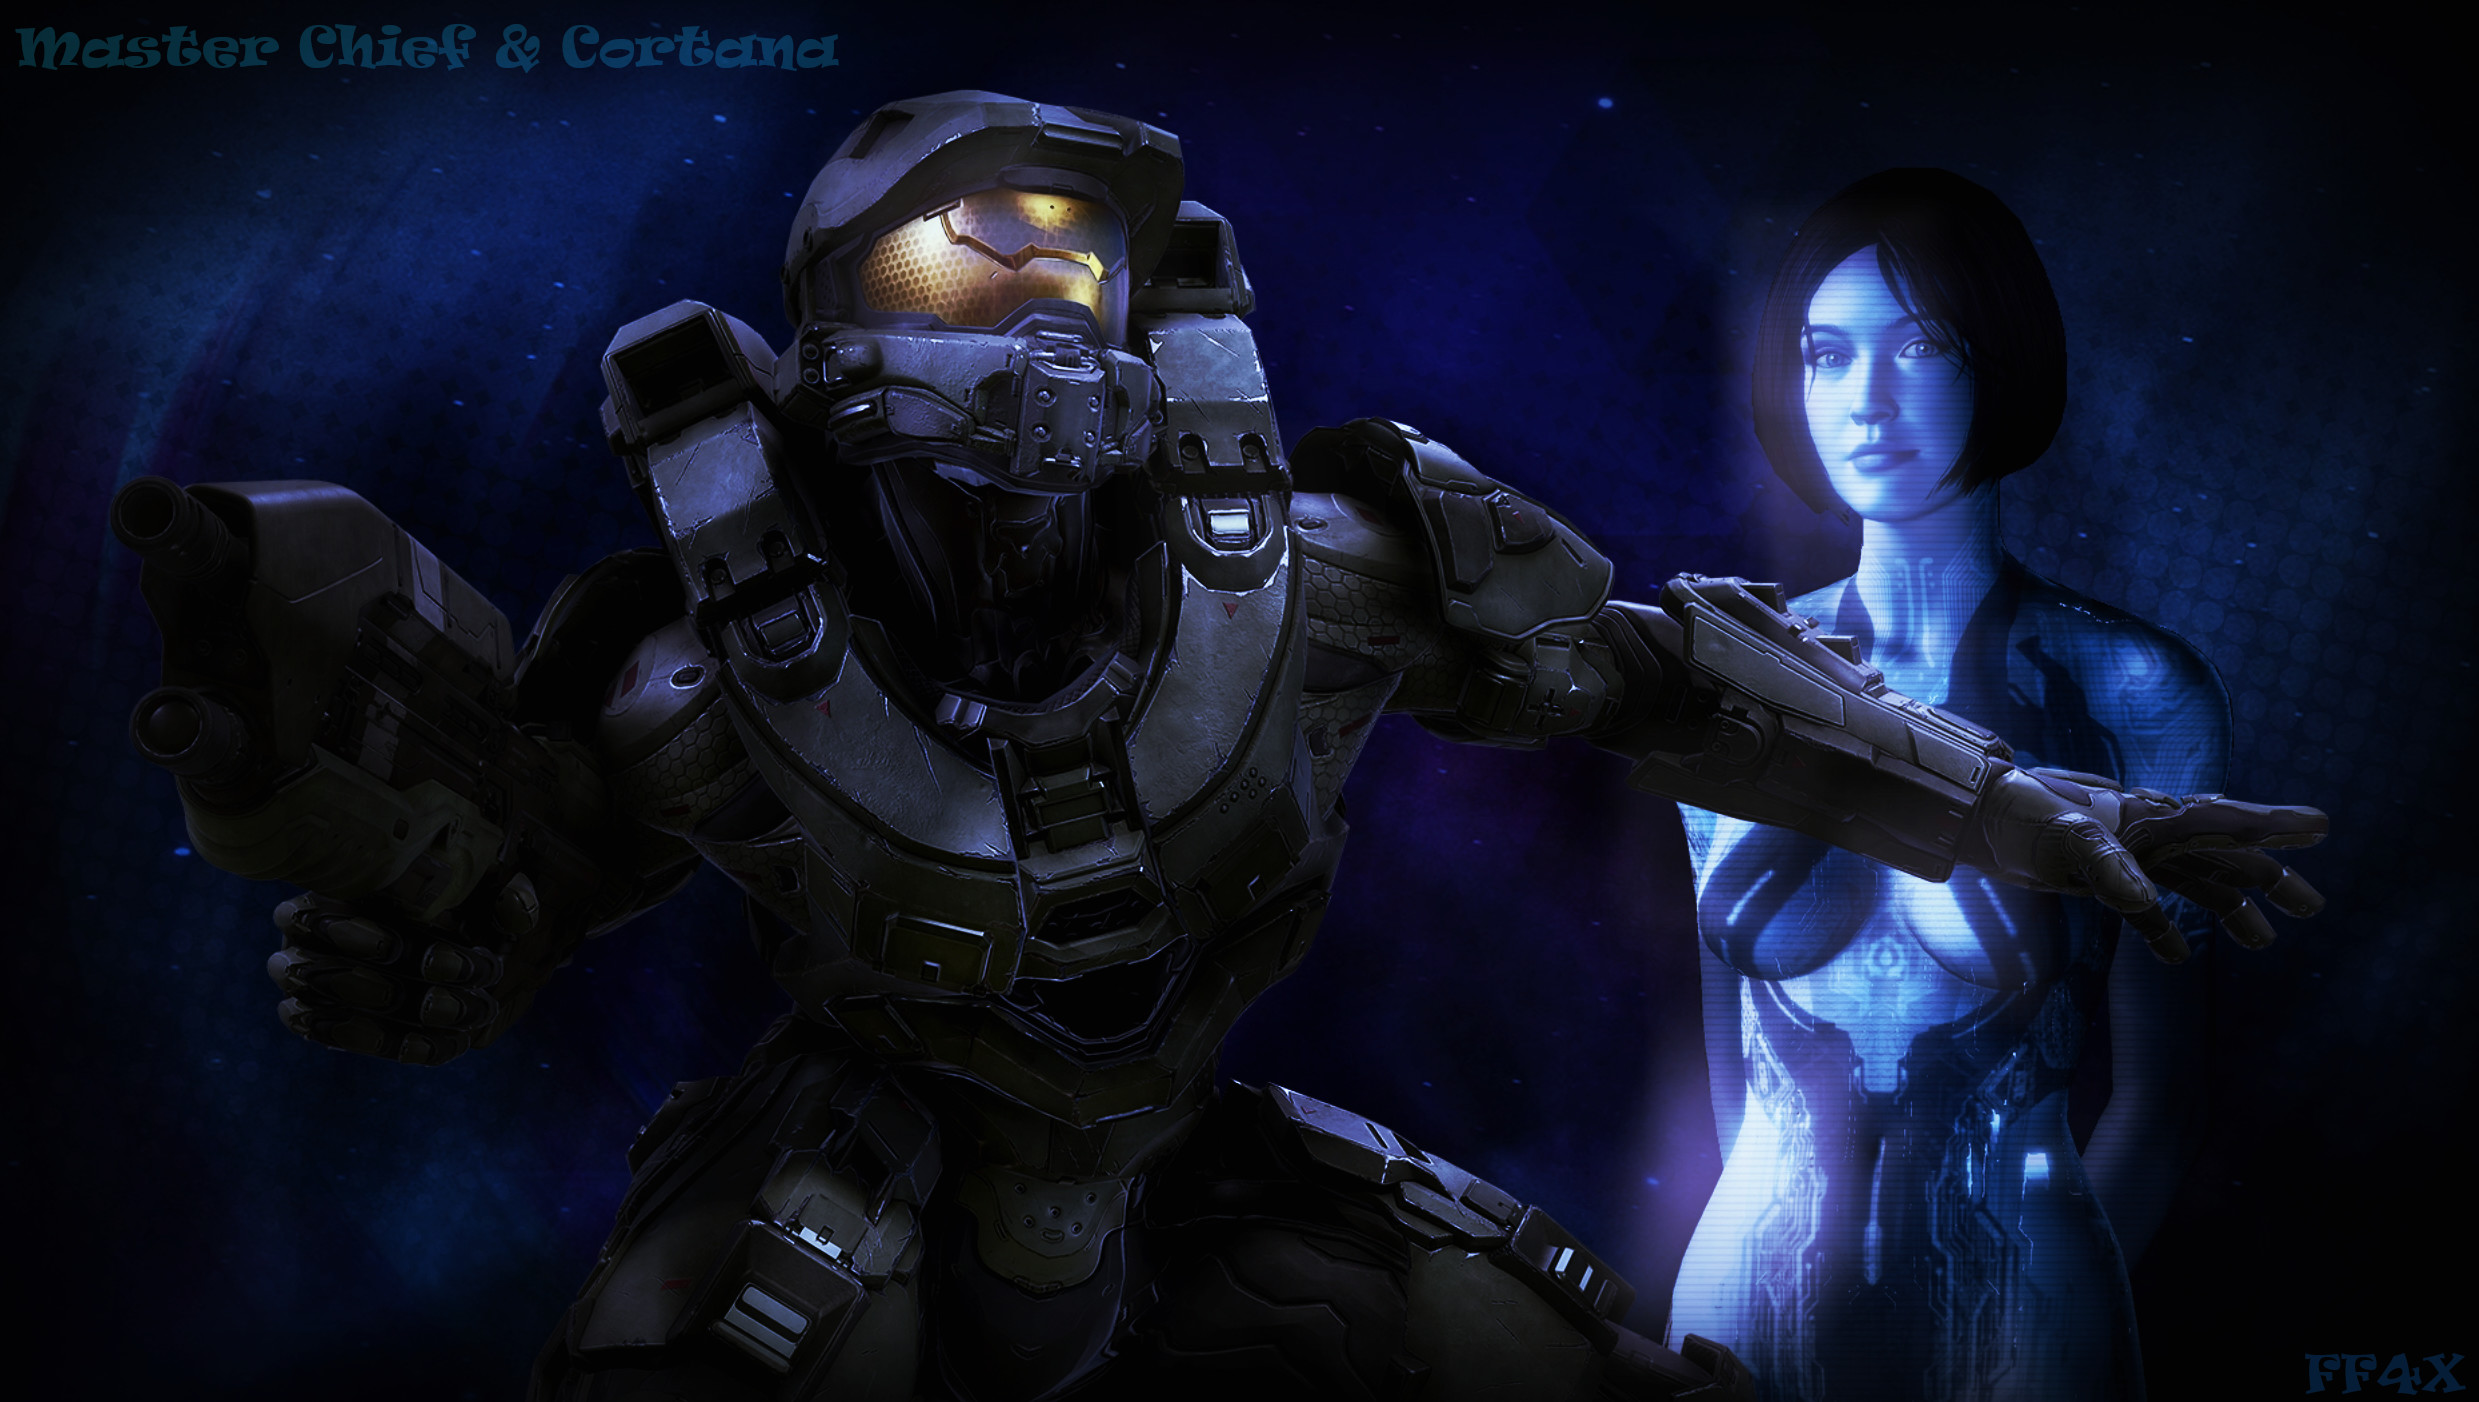 Halo 4 Cortana and Master Chief wallpaper by FireFox4X.